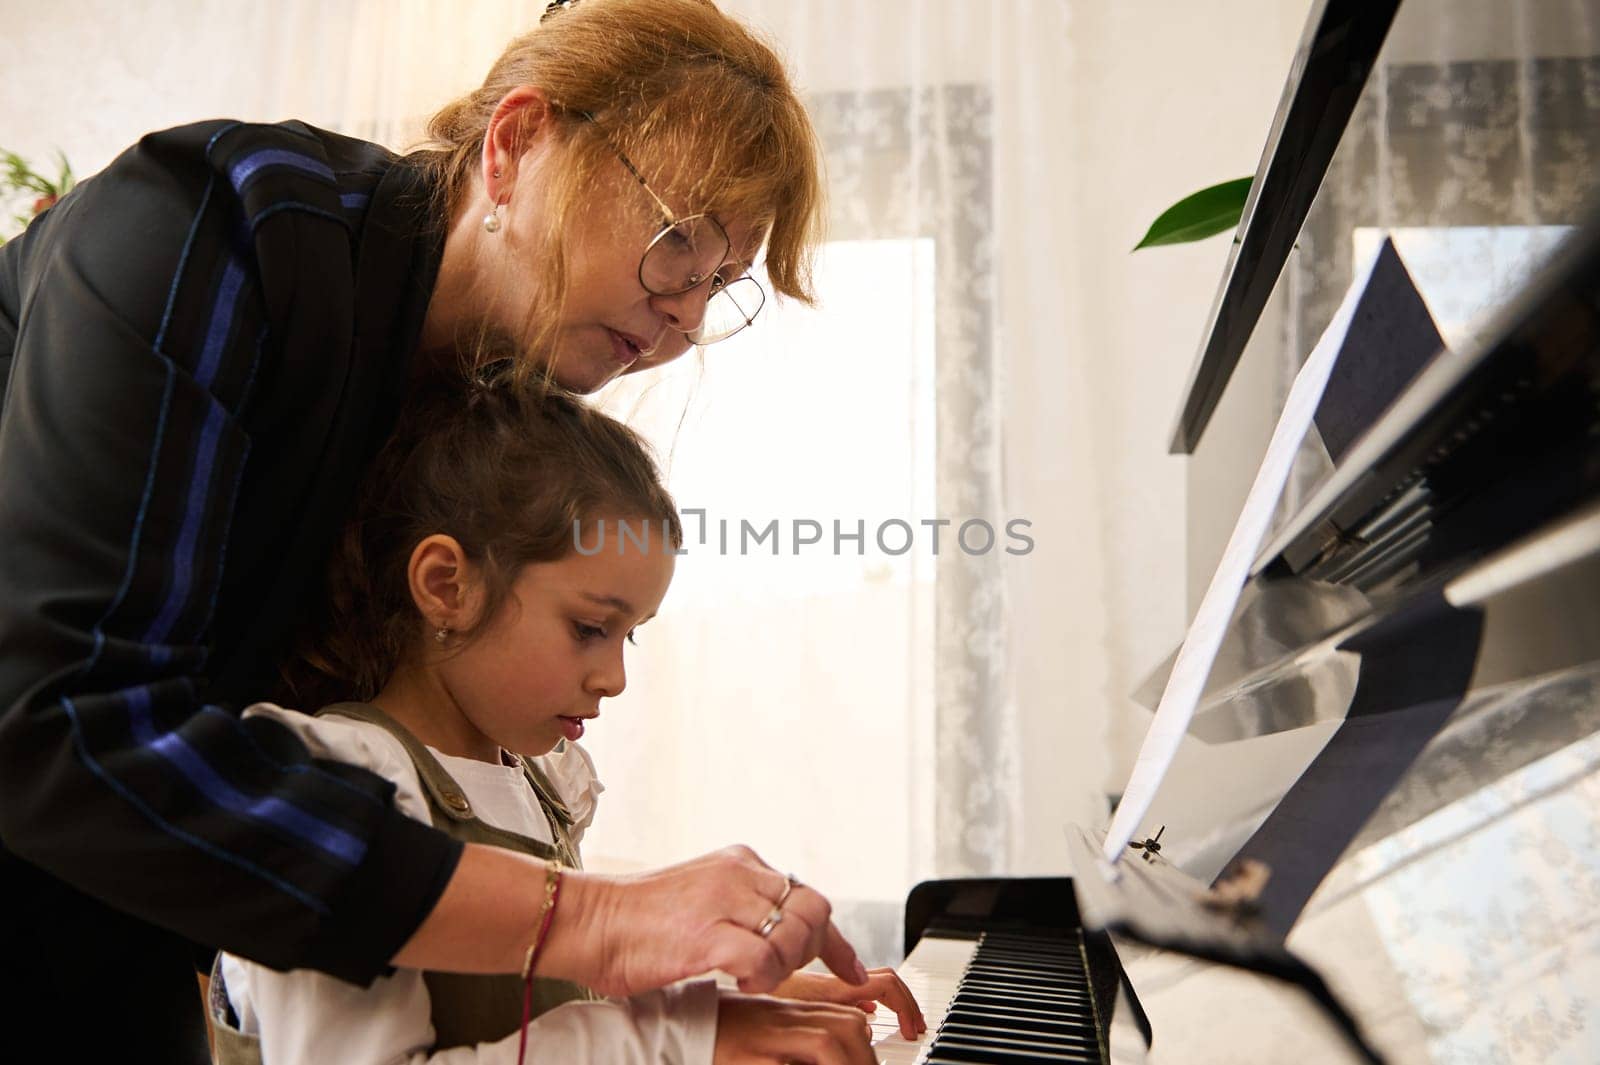 Closeup side view of child touching piano keys under the guidance of a musician pianist teacher explaining piano lesson by artgf